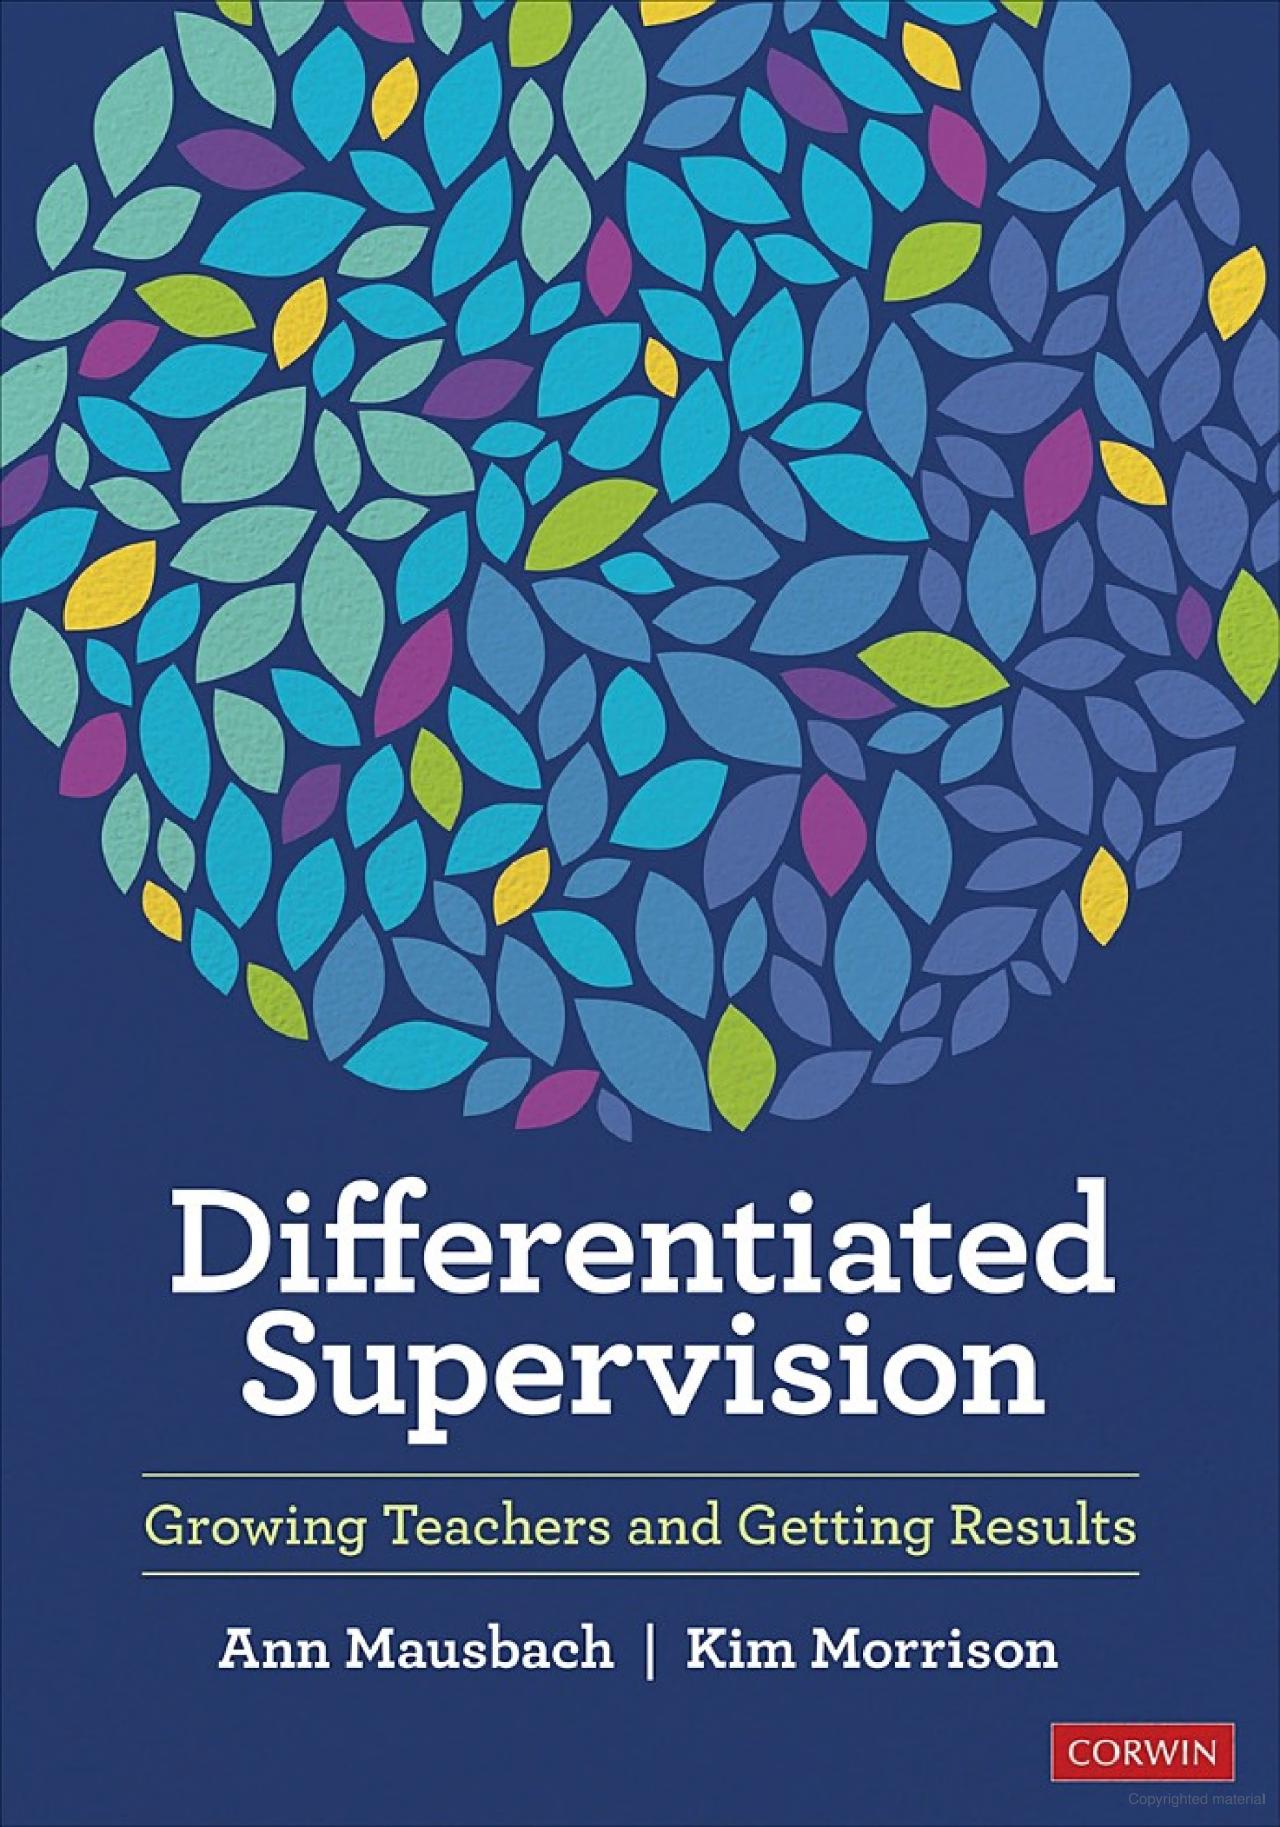 Differentiated Supervision: Growing Teachers and Getting Results By Ann Mausbach and Kim Morrison (Corwin, 2023)